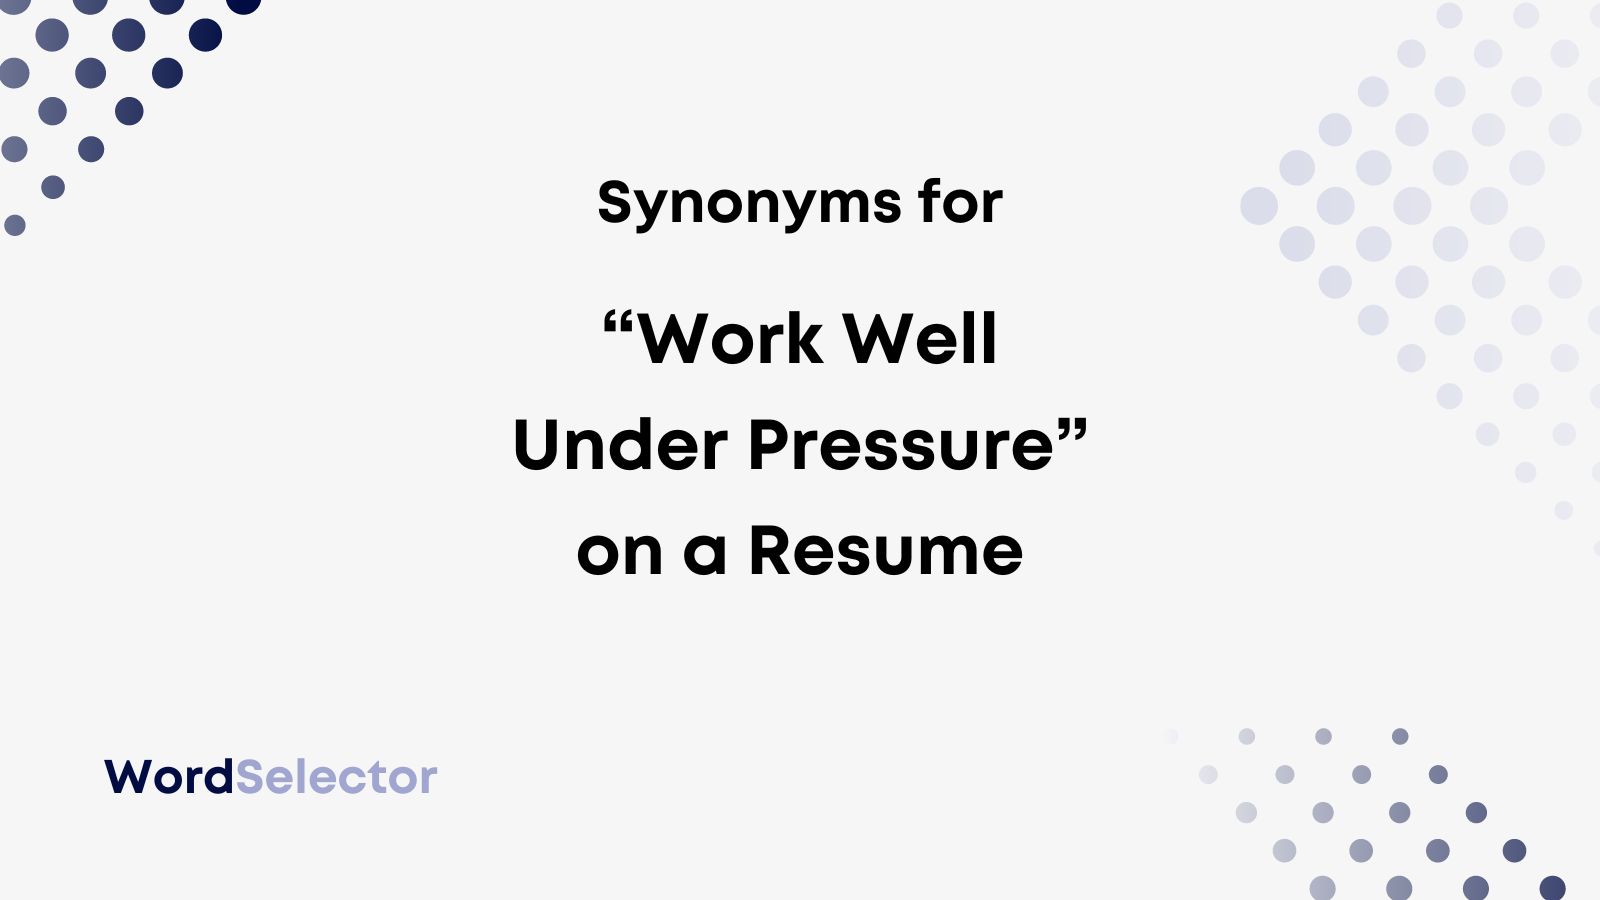 13 Synonyms for “Work Well Under Pressure” on Your Resume - WordSelector